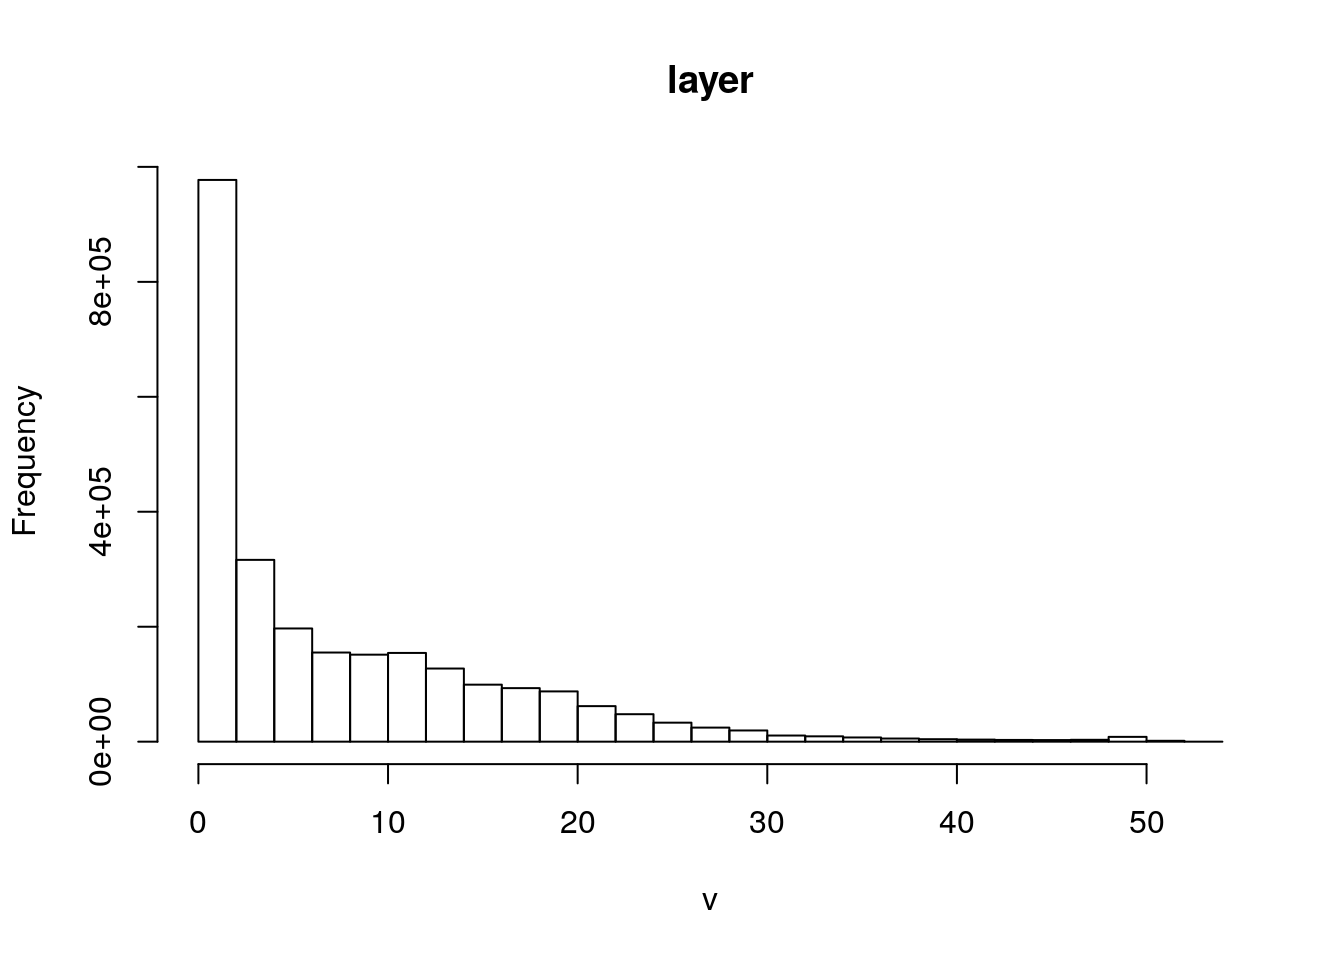 Simple histogram of the digital terrain model for Arne. Note the distribution of the elevations. Most of the site lies just a few meters above sea level with a maximum of 52m above sea lavel.